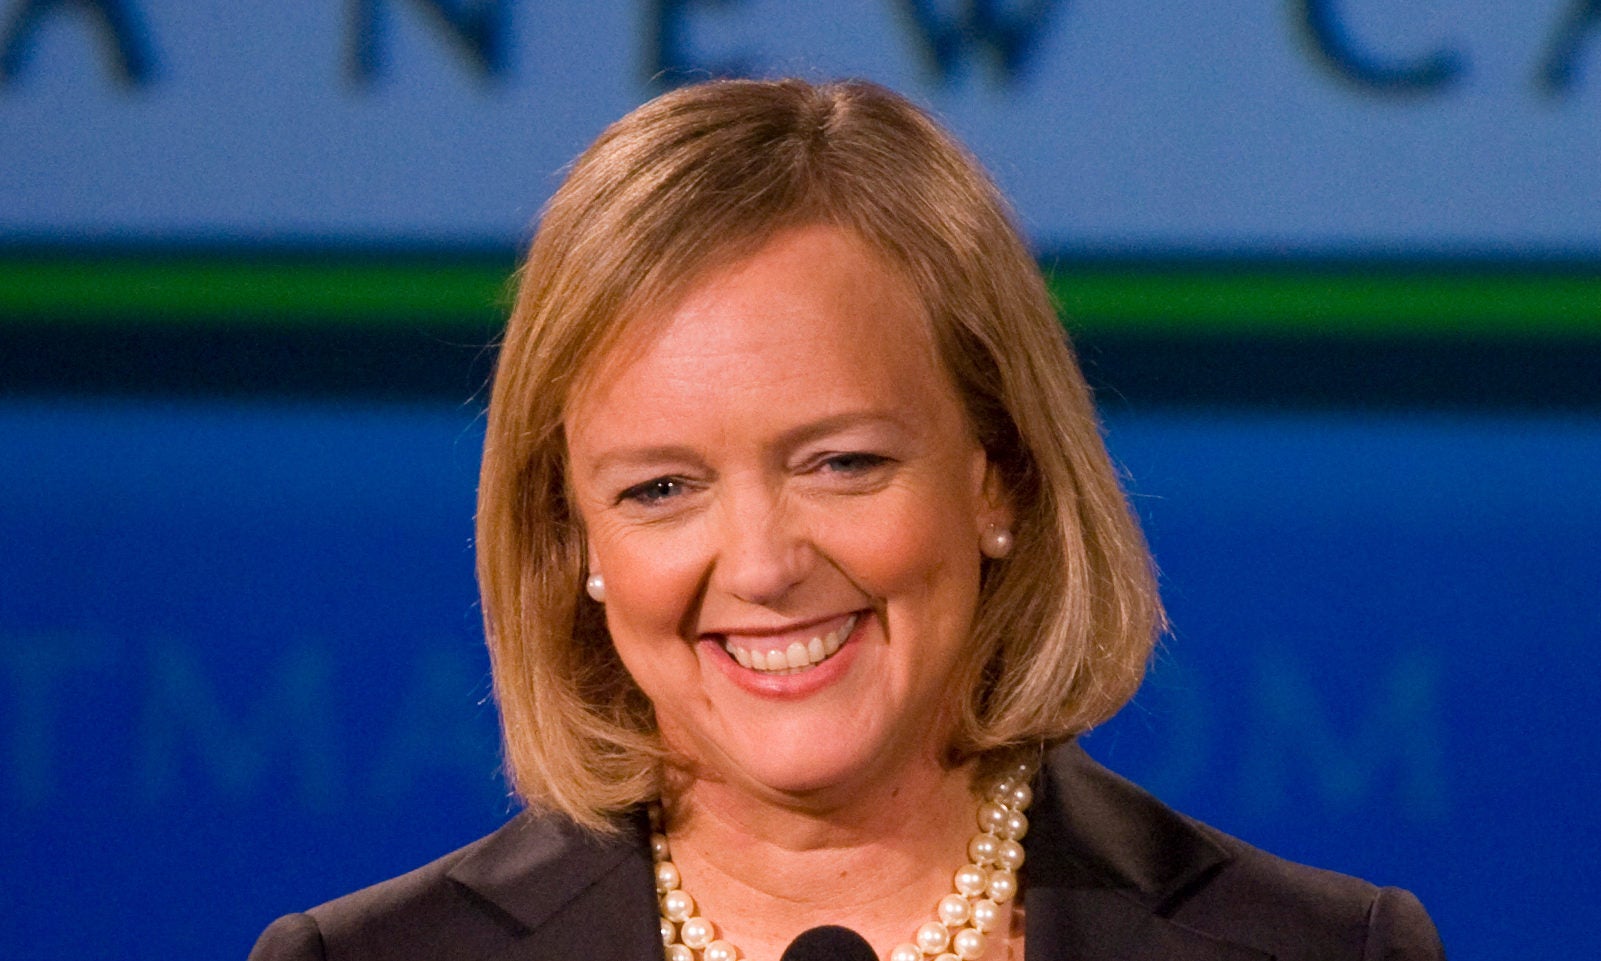 Meg Whitman to head up Hollywood mobile media firm after HPE